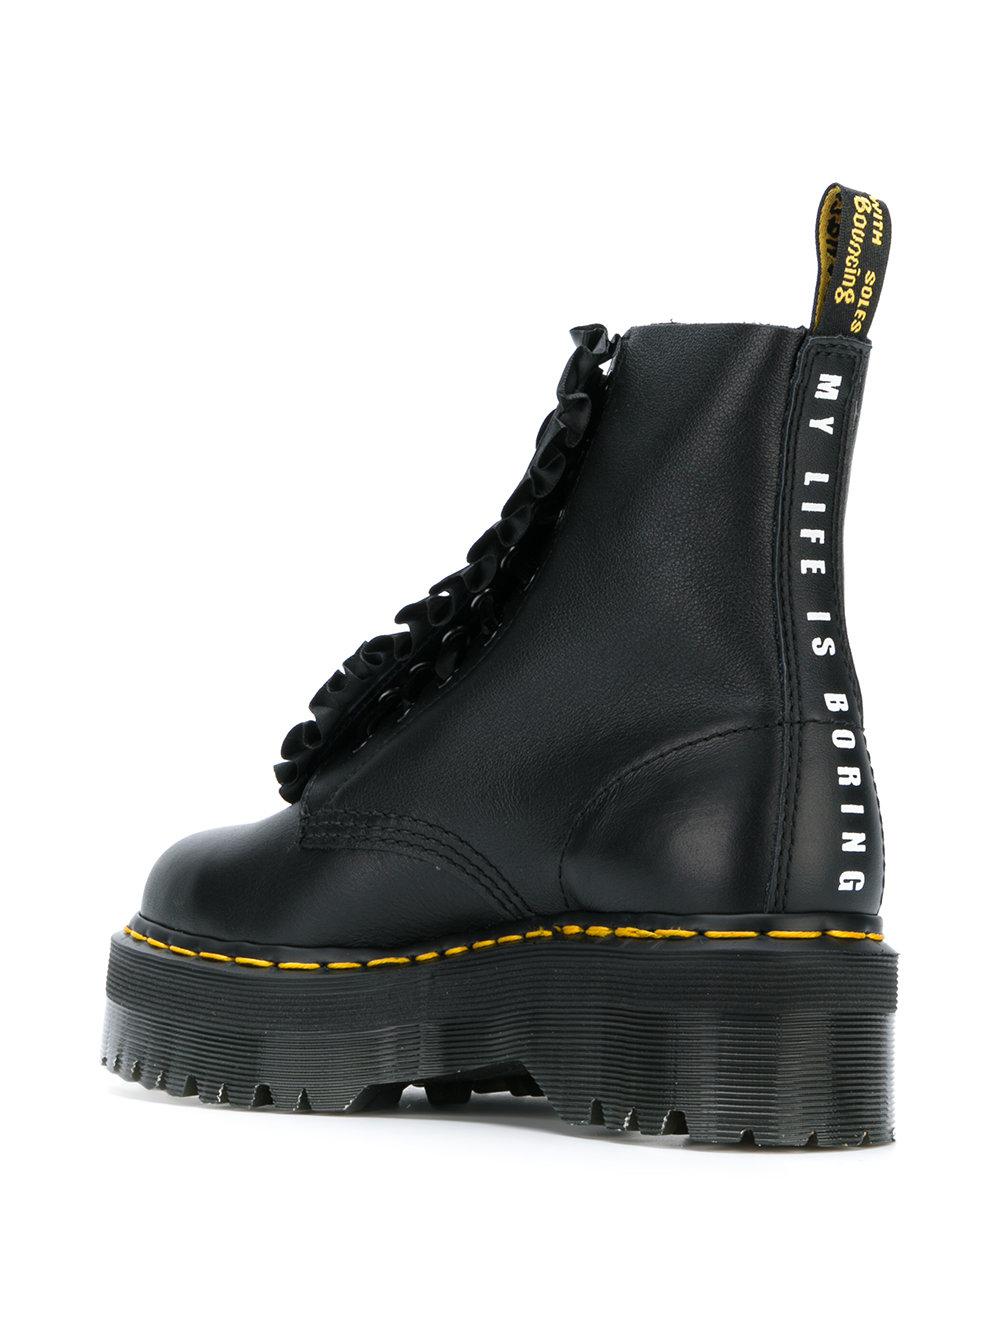 Dr. Martens Leather Lazy Oaf Jungle Boots in Black | Lyst